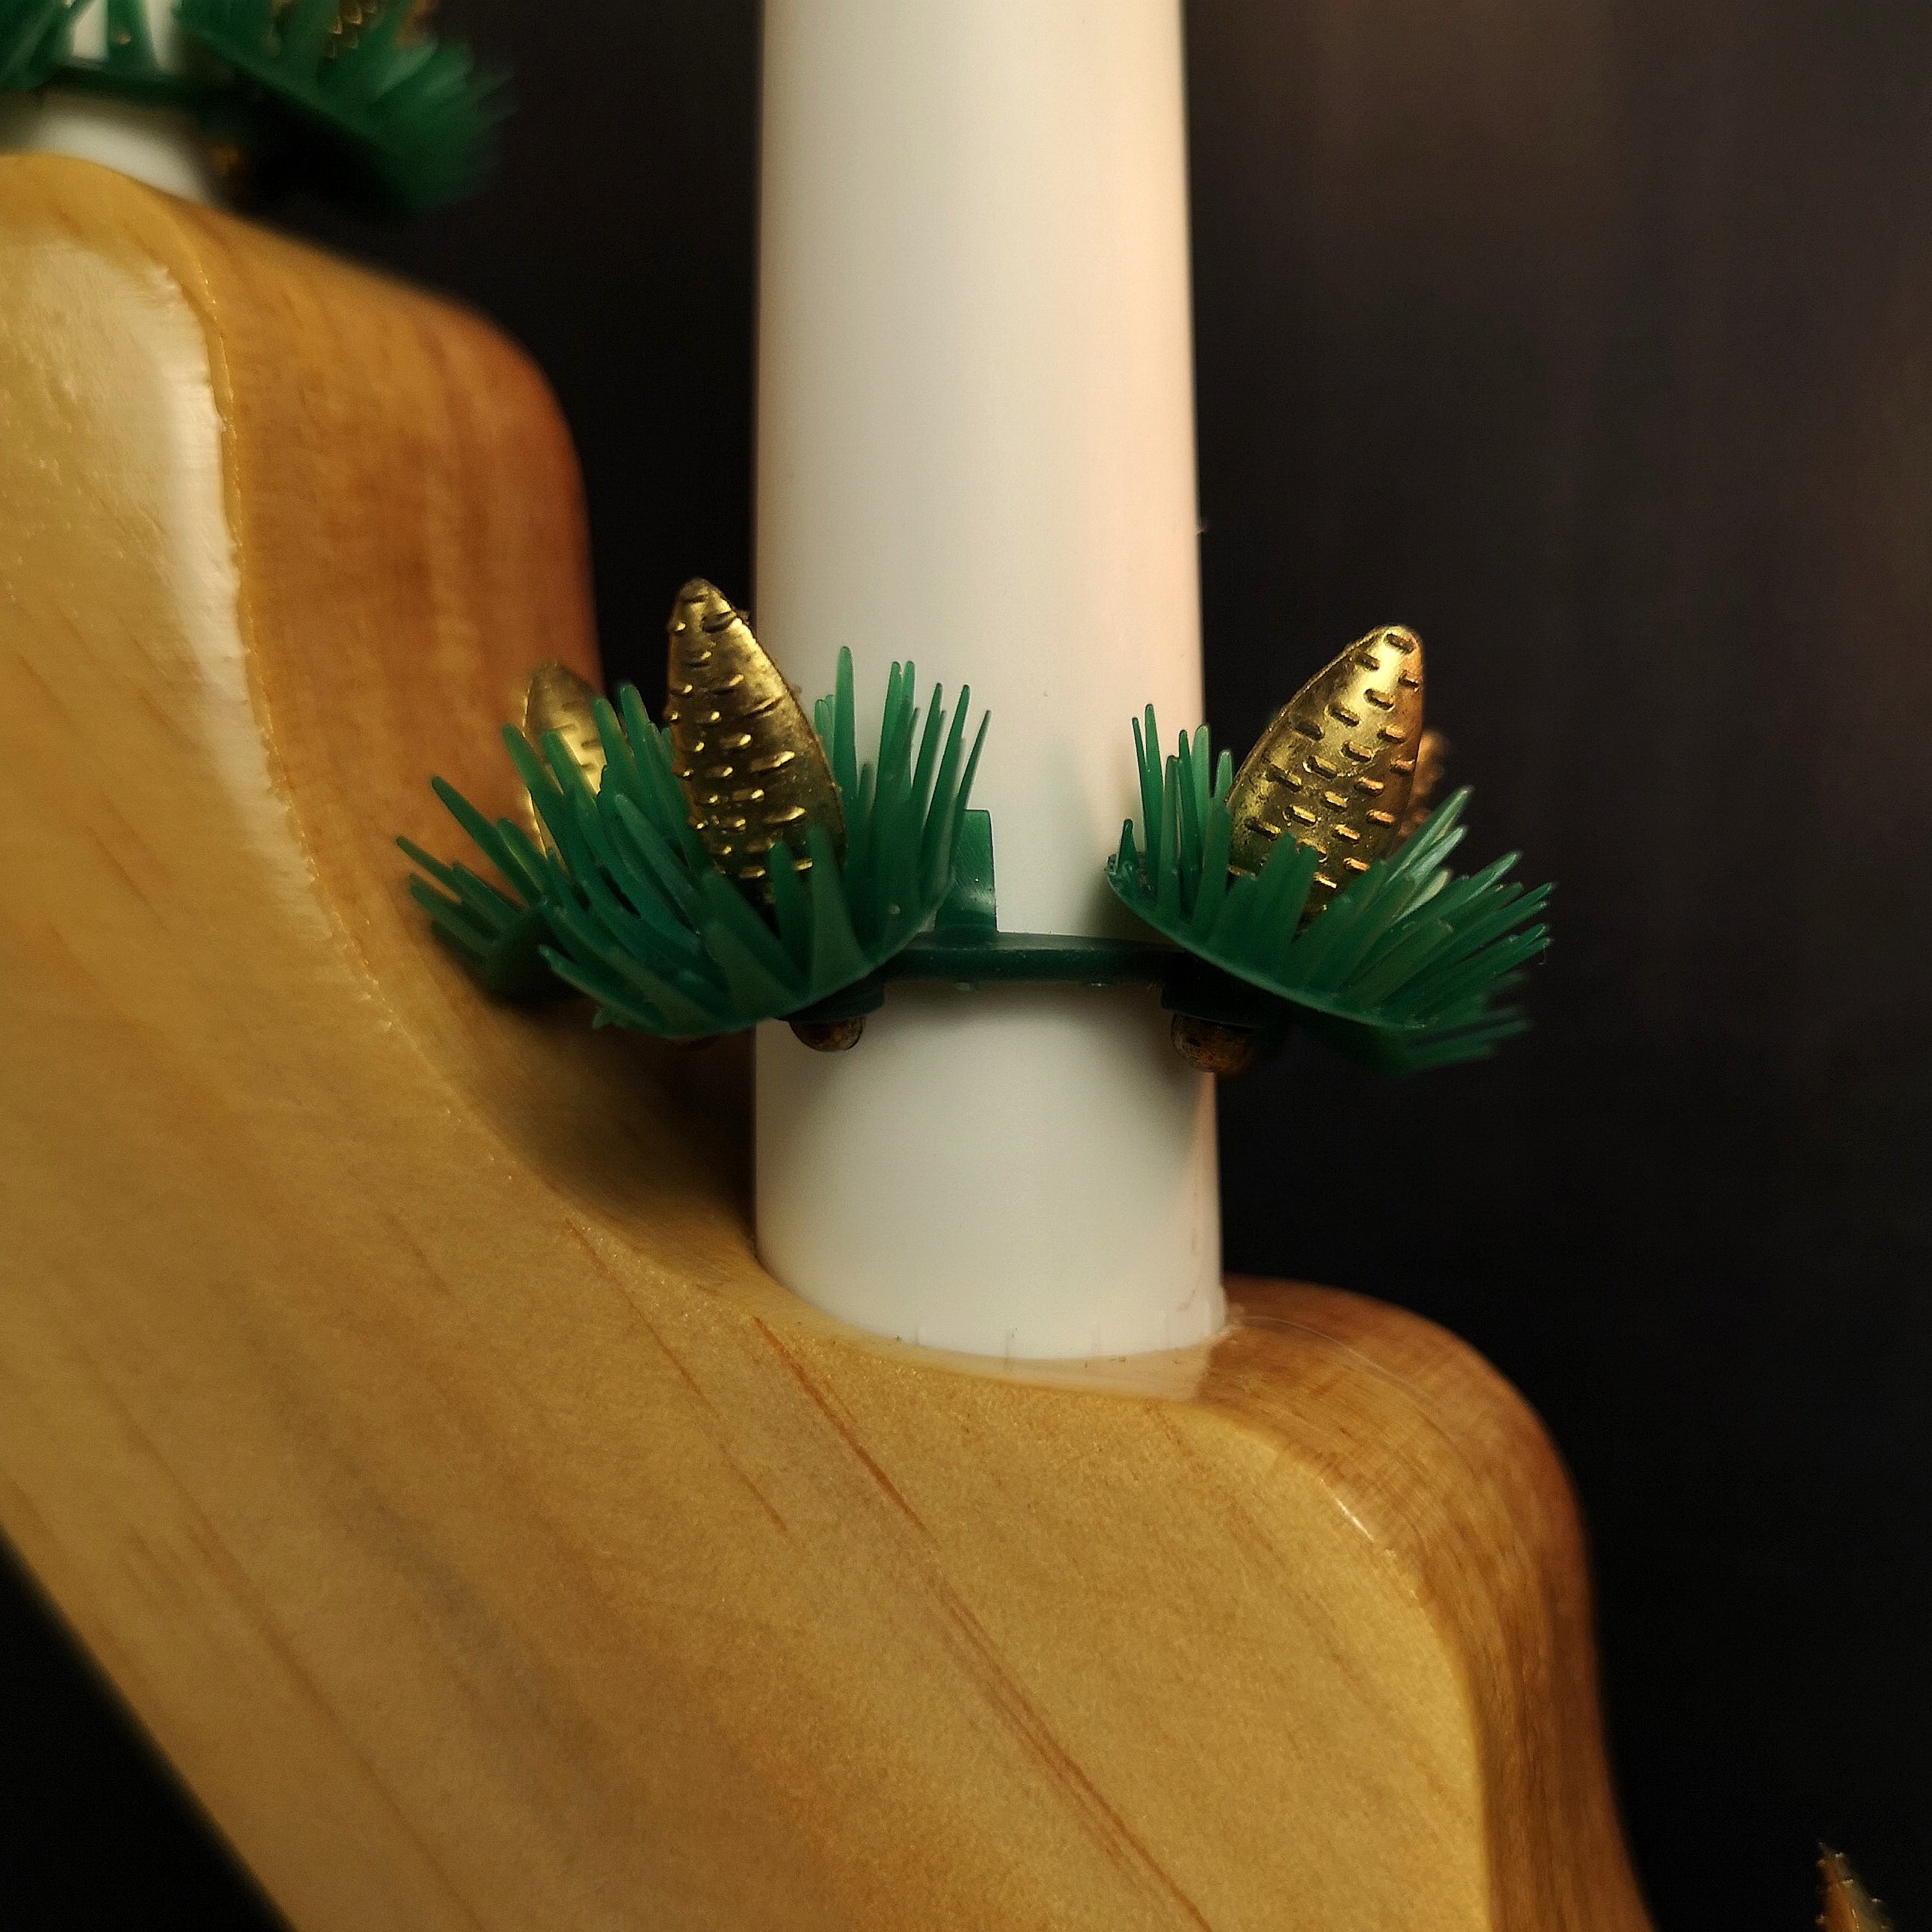 40cm Premier Christmas Candlebridge with 7 Clear Bulb V Shaped in Light Wood  Mains Powered